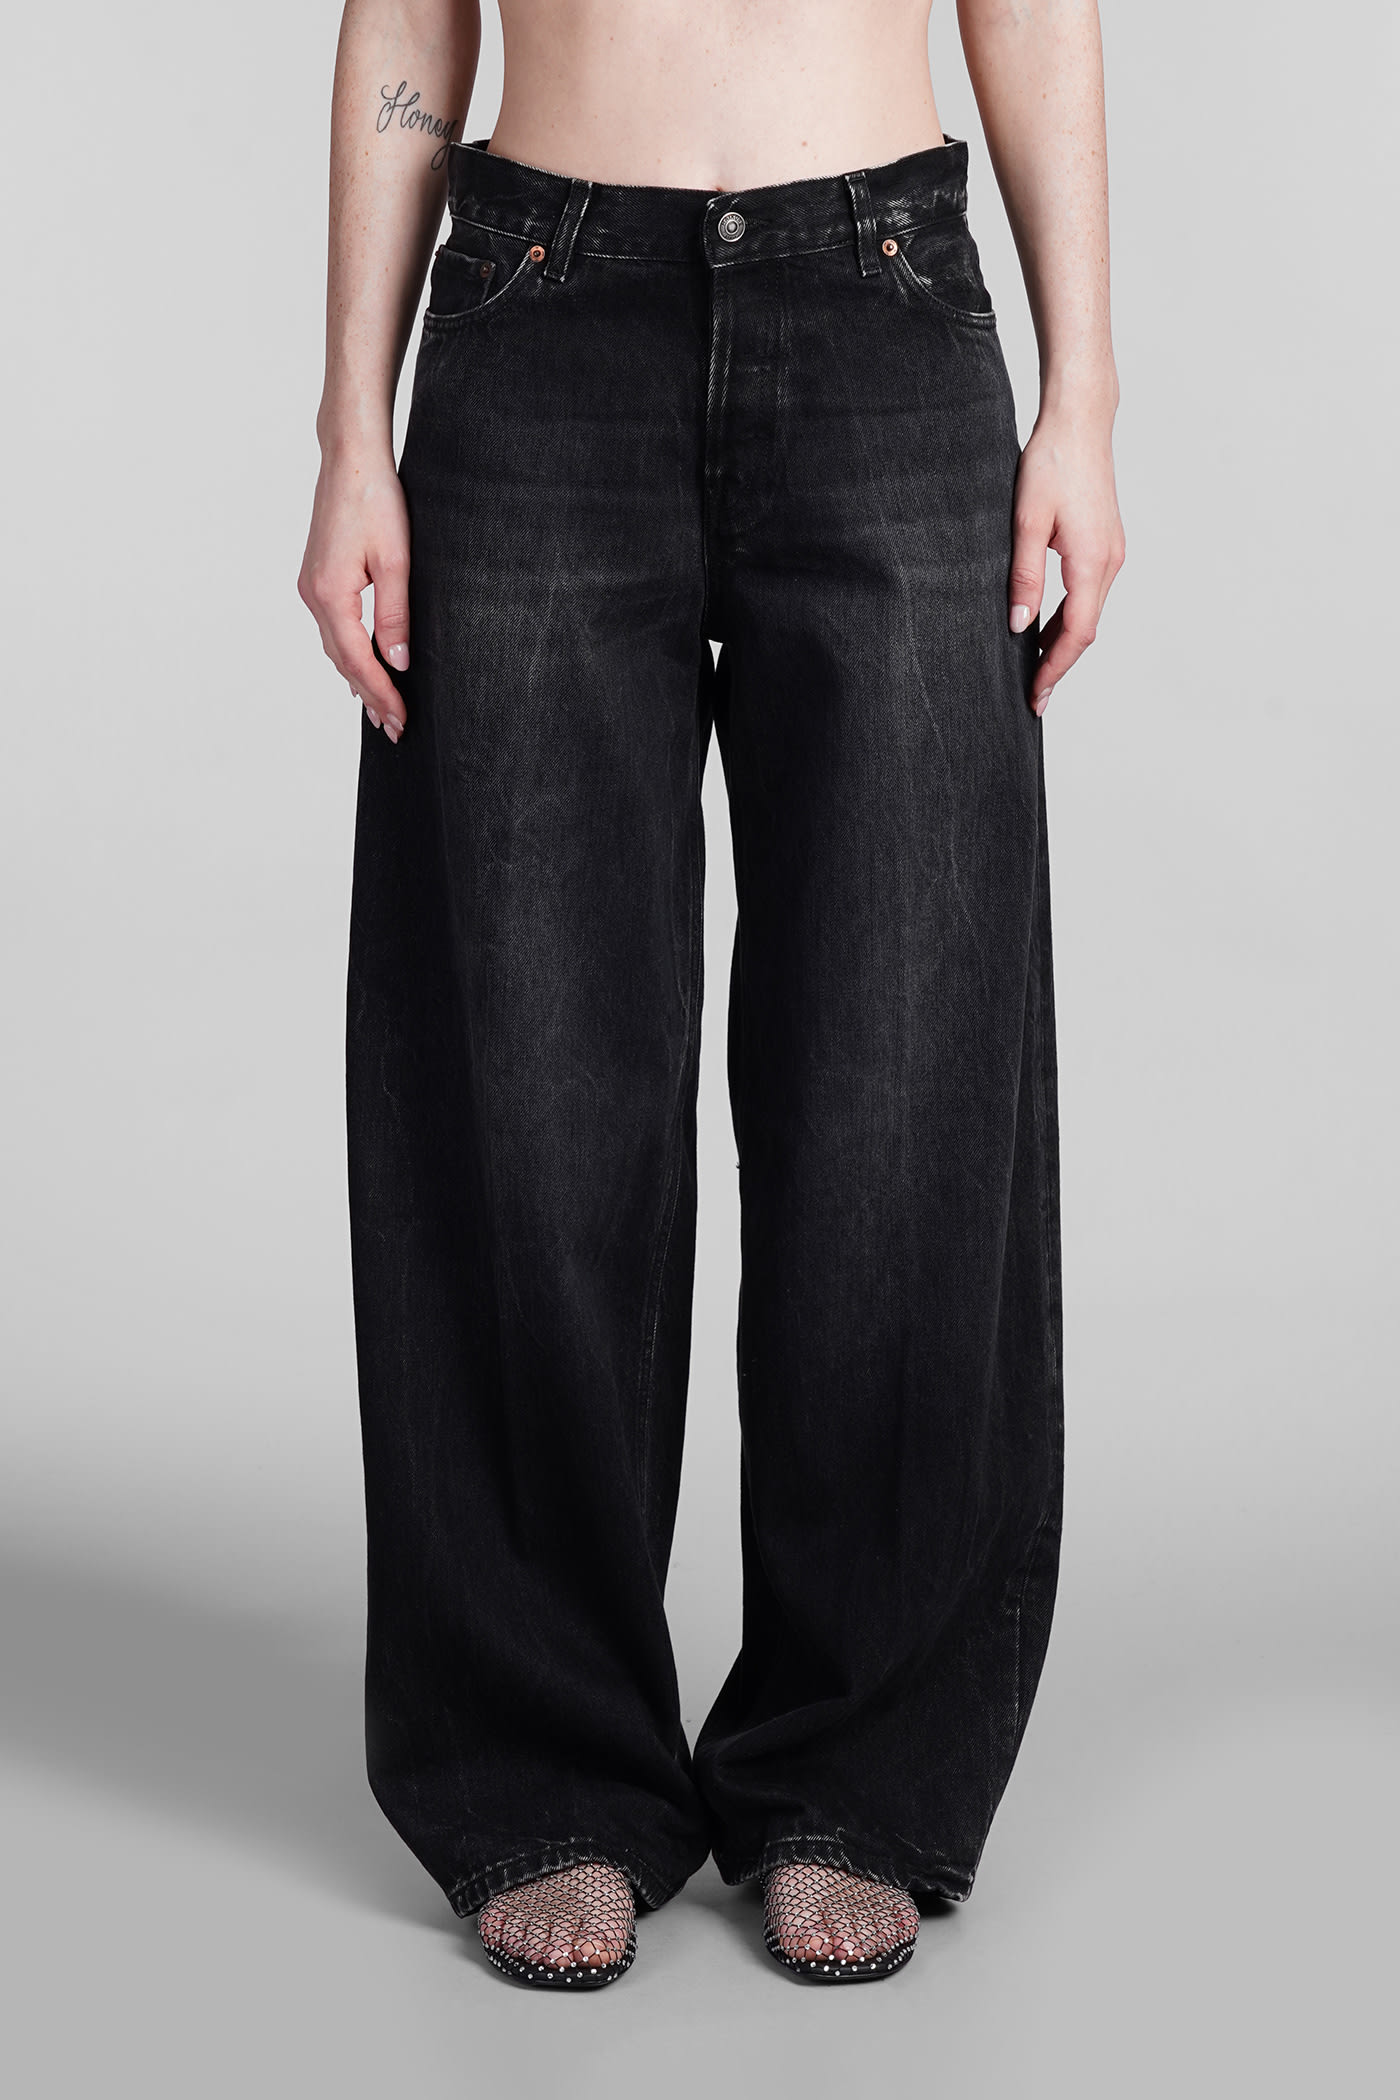 Bethany Jeans In Black Cotton